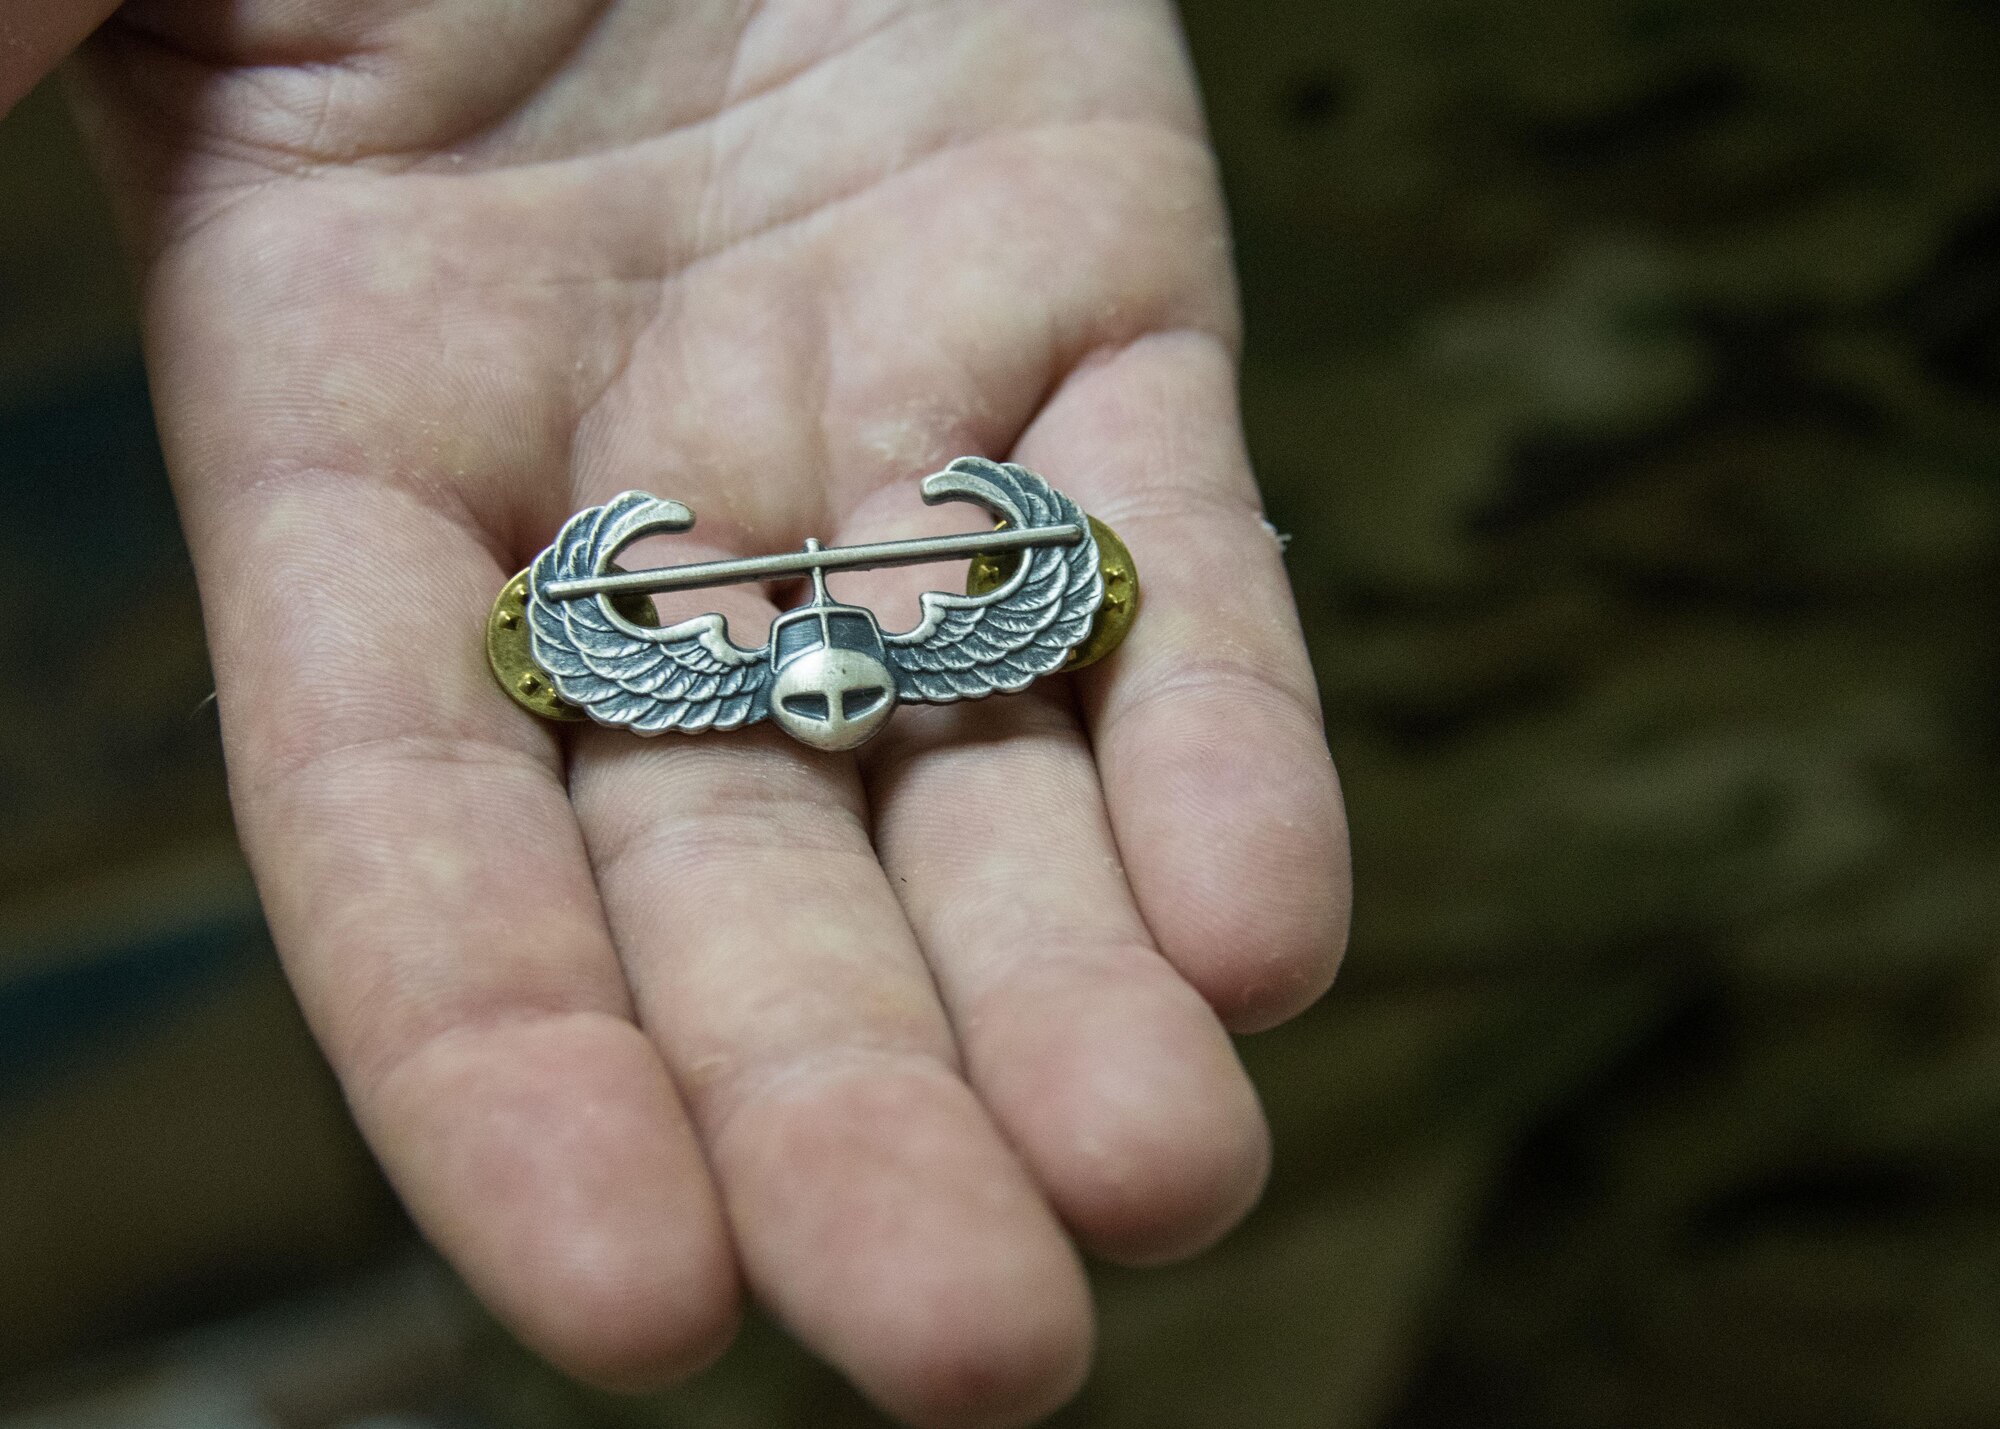 Senior Airman Domenic Martino, a 386th Air Expeditionary Wing civil engineering squadron explosive ordnance disposal technician, shows the U.S. Army Air Assault School pin he received after graduating from the course. This course was only recently offered in the area of responsibility and Martino was one of the first Airmen to graduate from the course. (U.S. Air Force photo/Staff Sgt. Andrew Park)